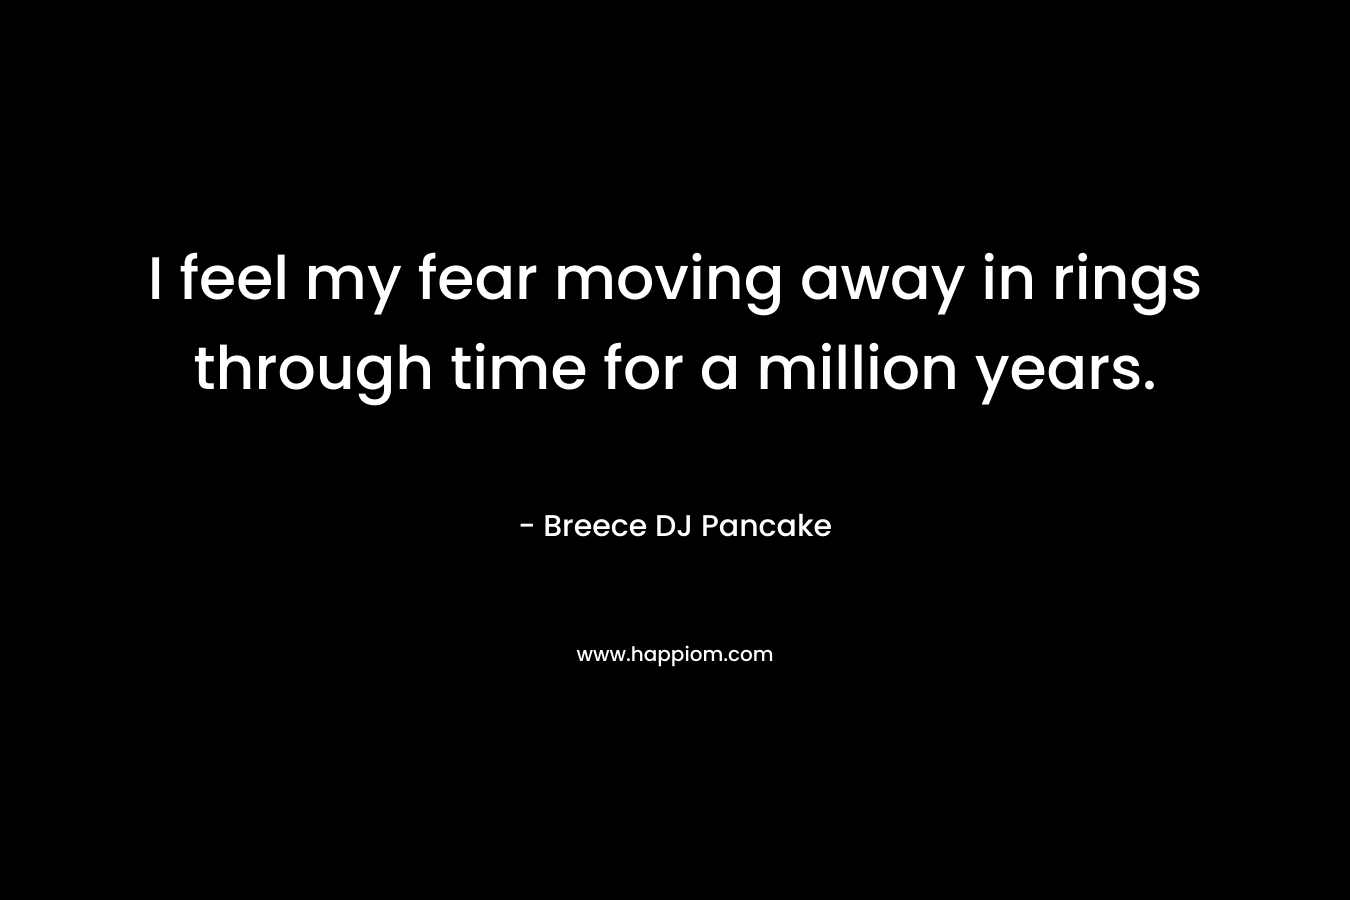 I feel my fear moving away in rings through time for a million years. – Breece DJ Pancake